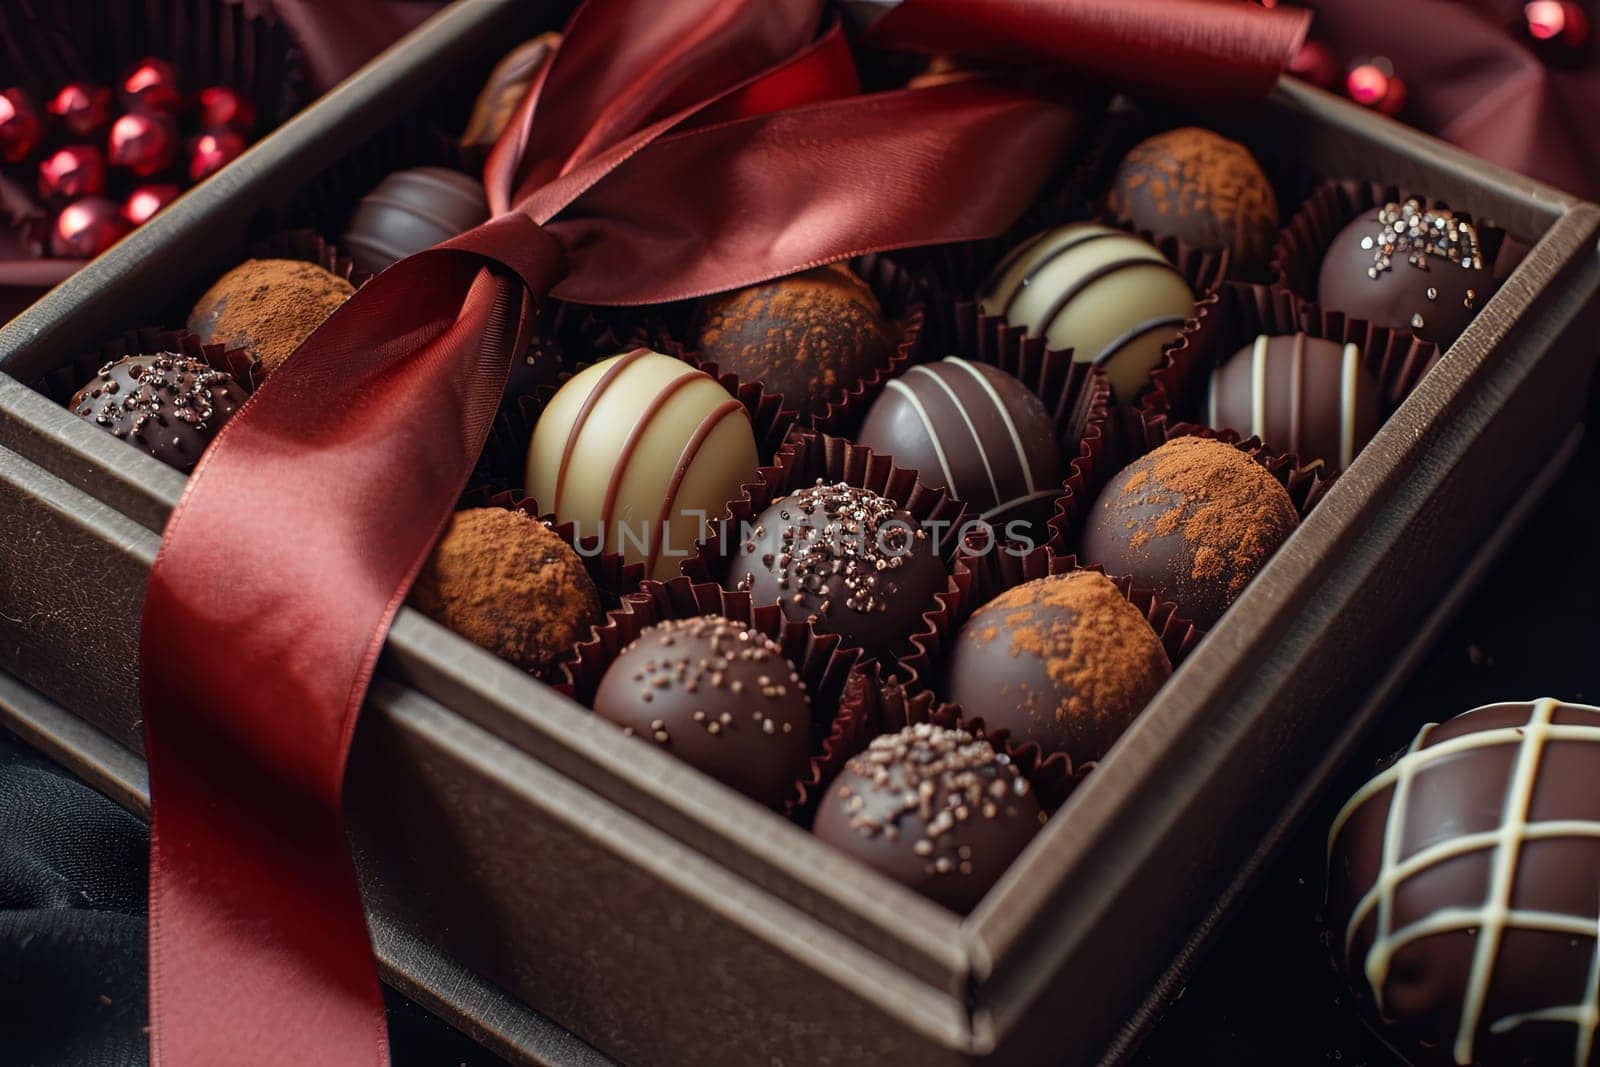 Luxurious assortment of rich dark chocolates in an elegant box adorned with a red ribbon.